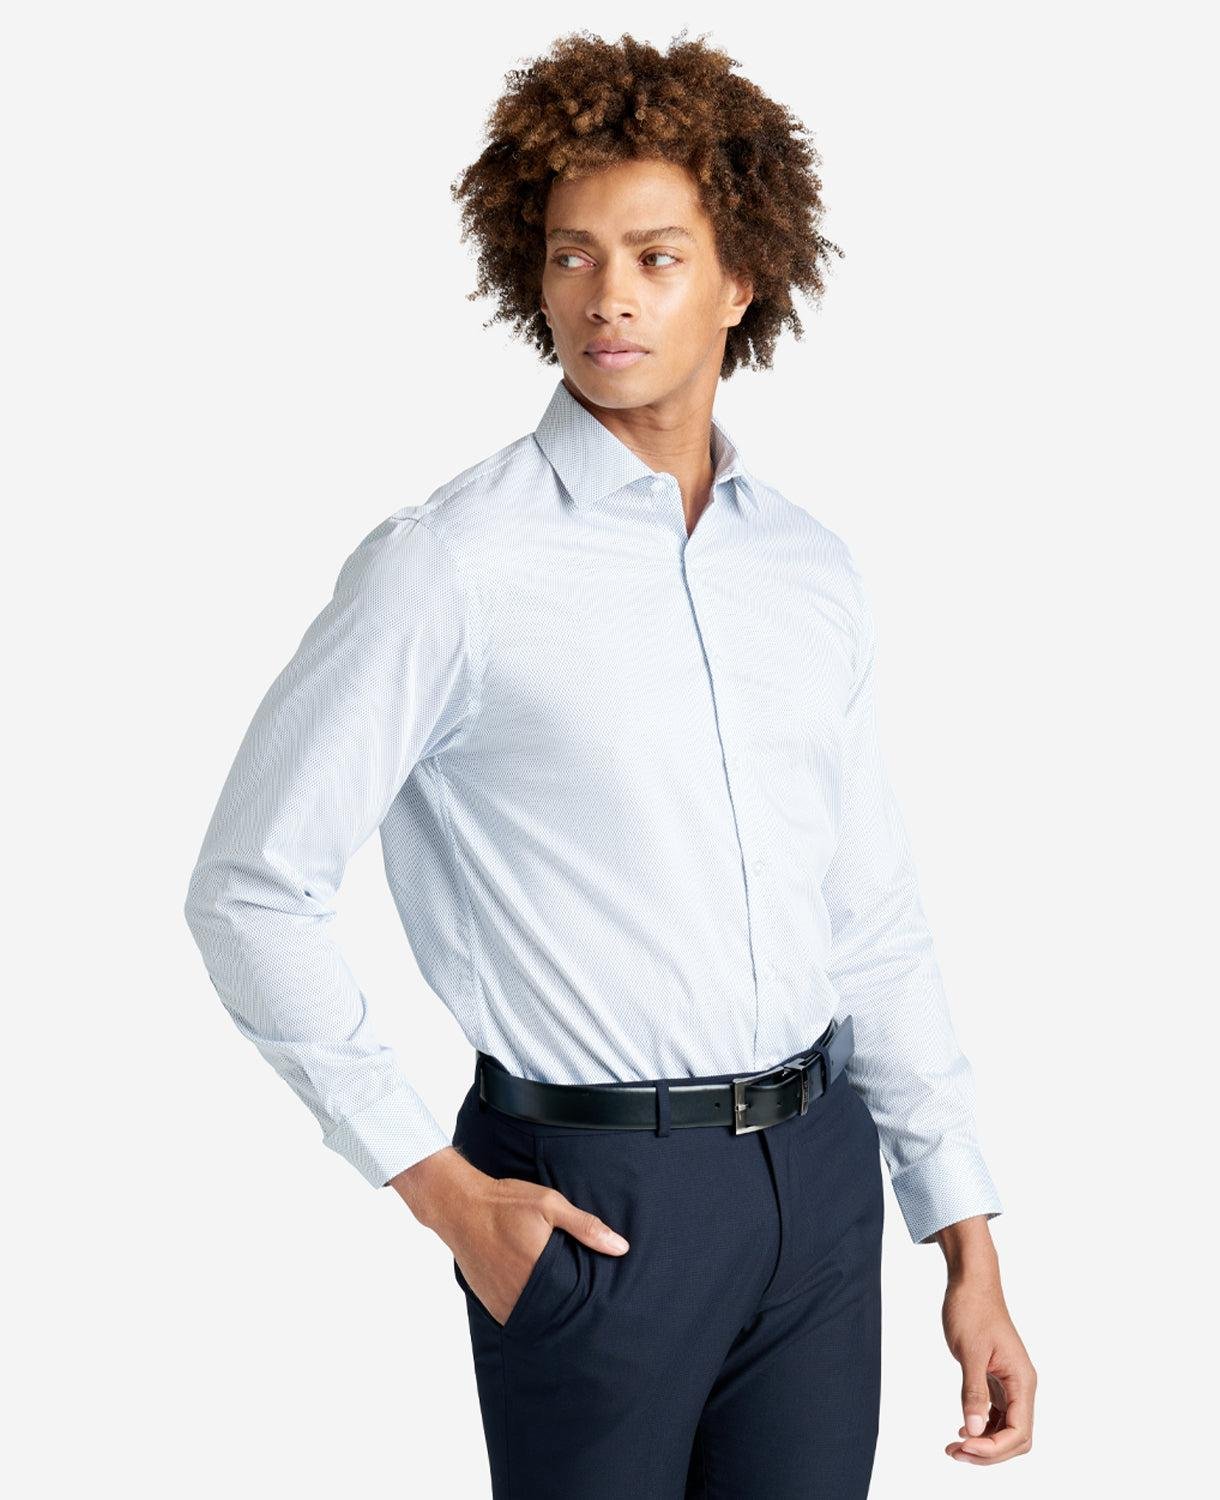 Slim Fit Kenneth Cole Natural Stretch Dress Shirt by KENNETH COLE